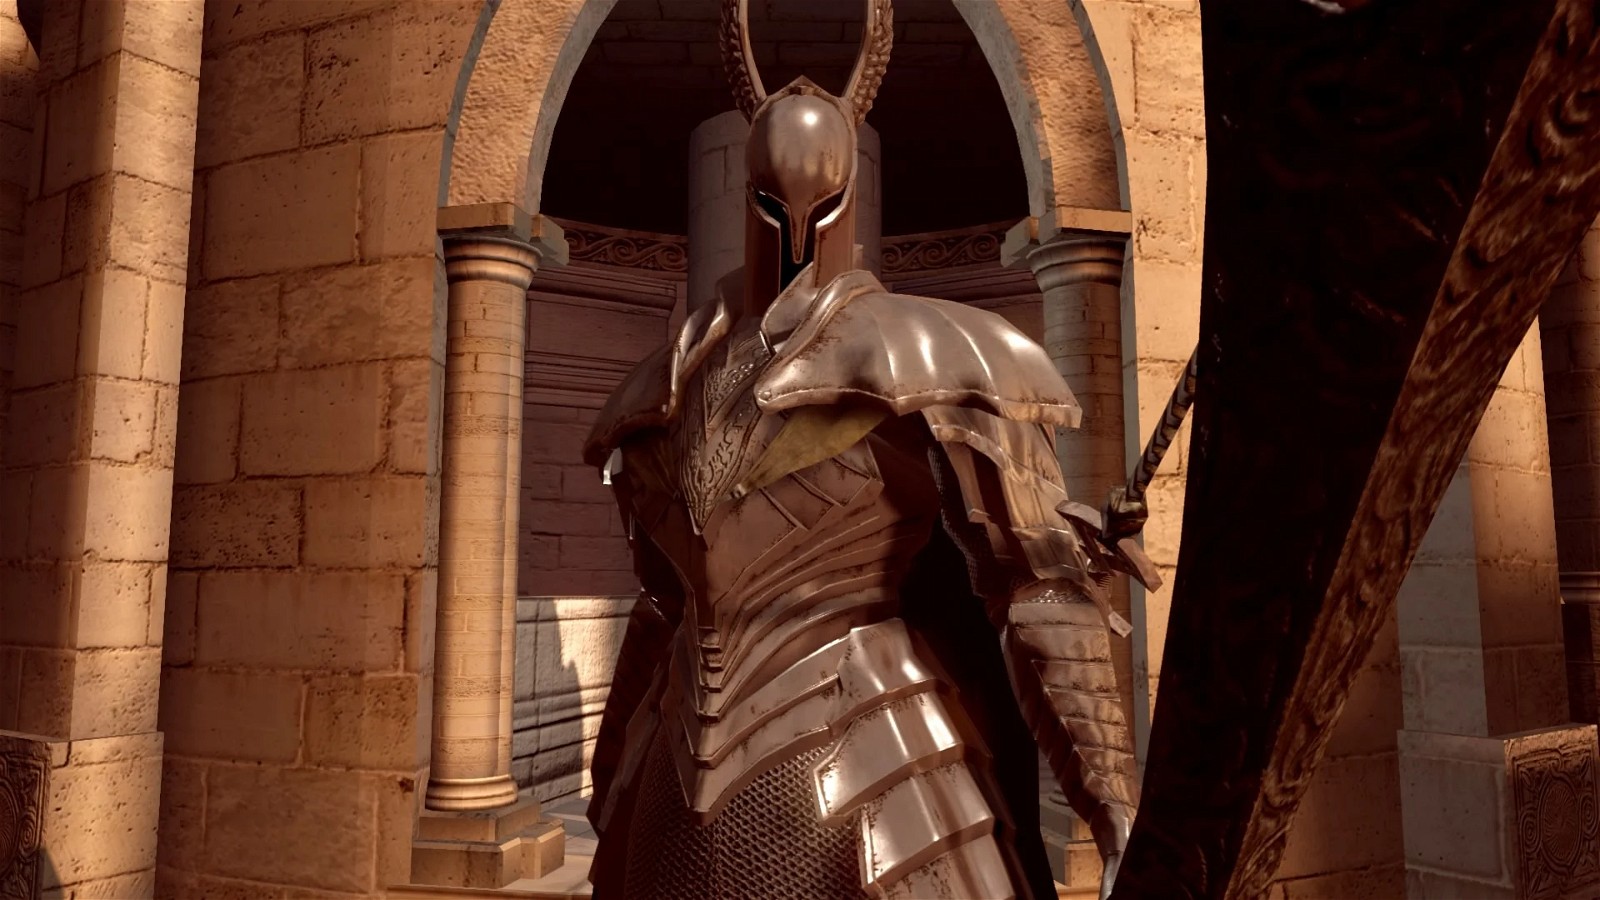 The more skilled silver archers could be tasked with training the silver knights. Image credit: FromSoftware